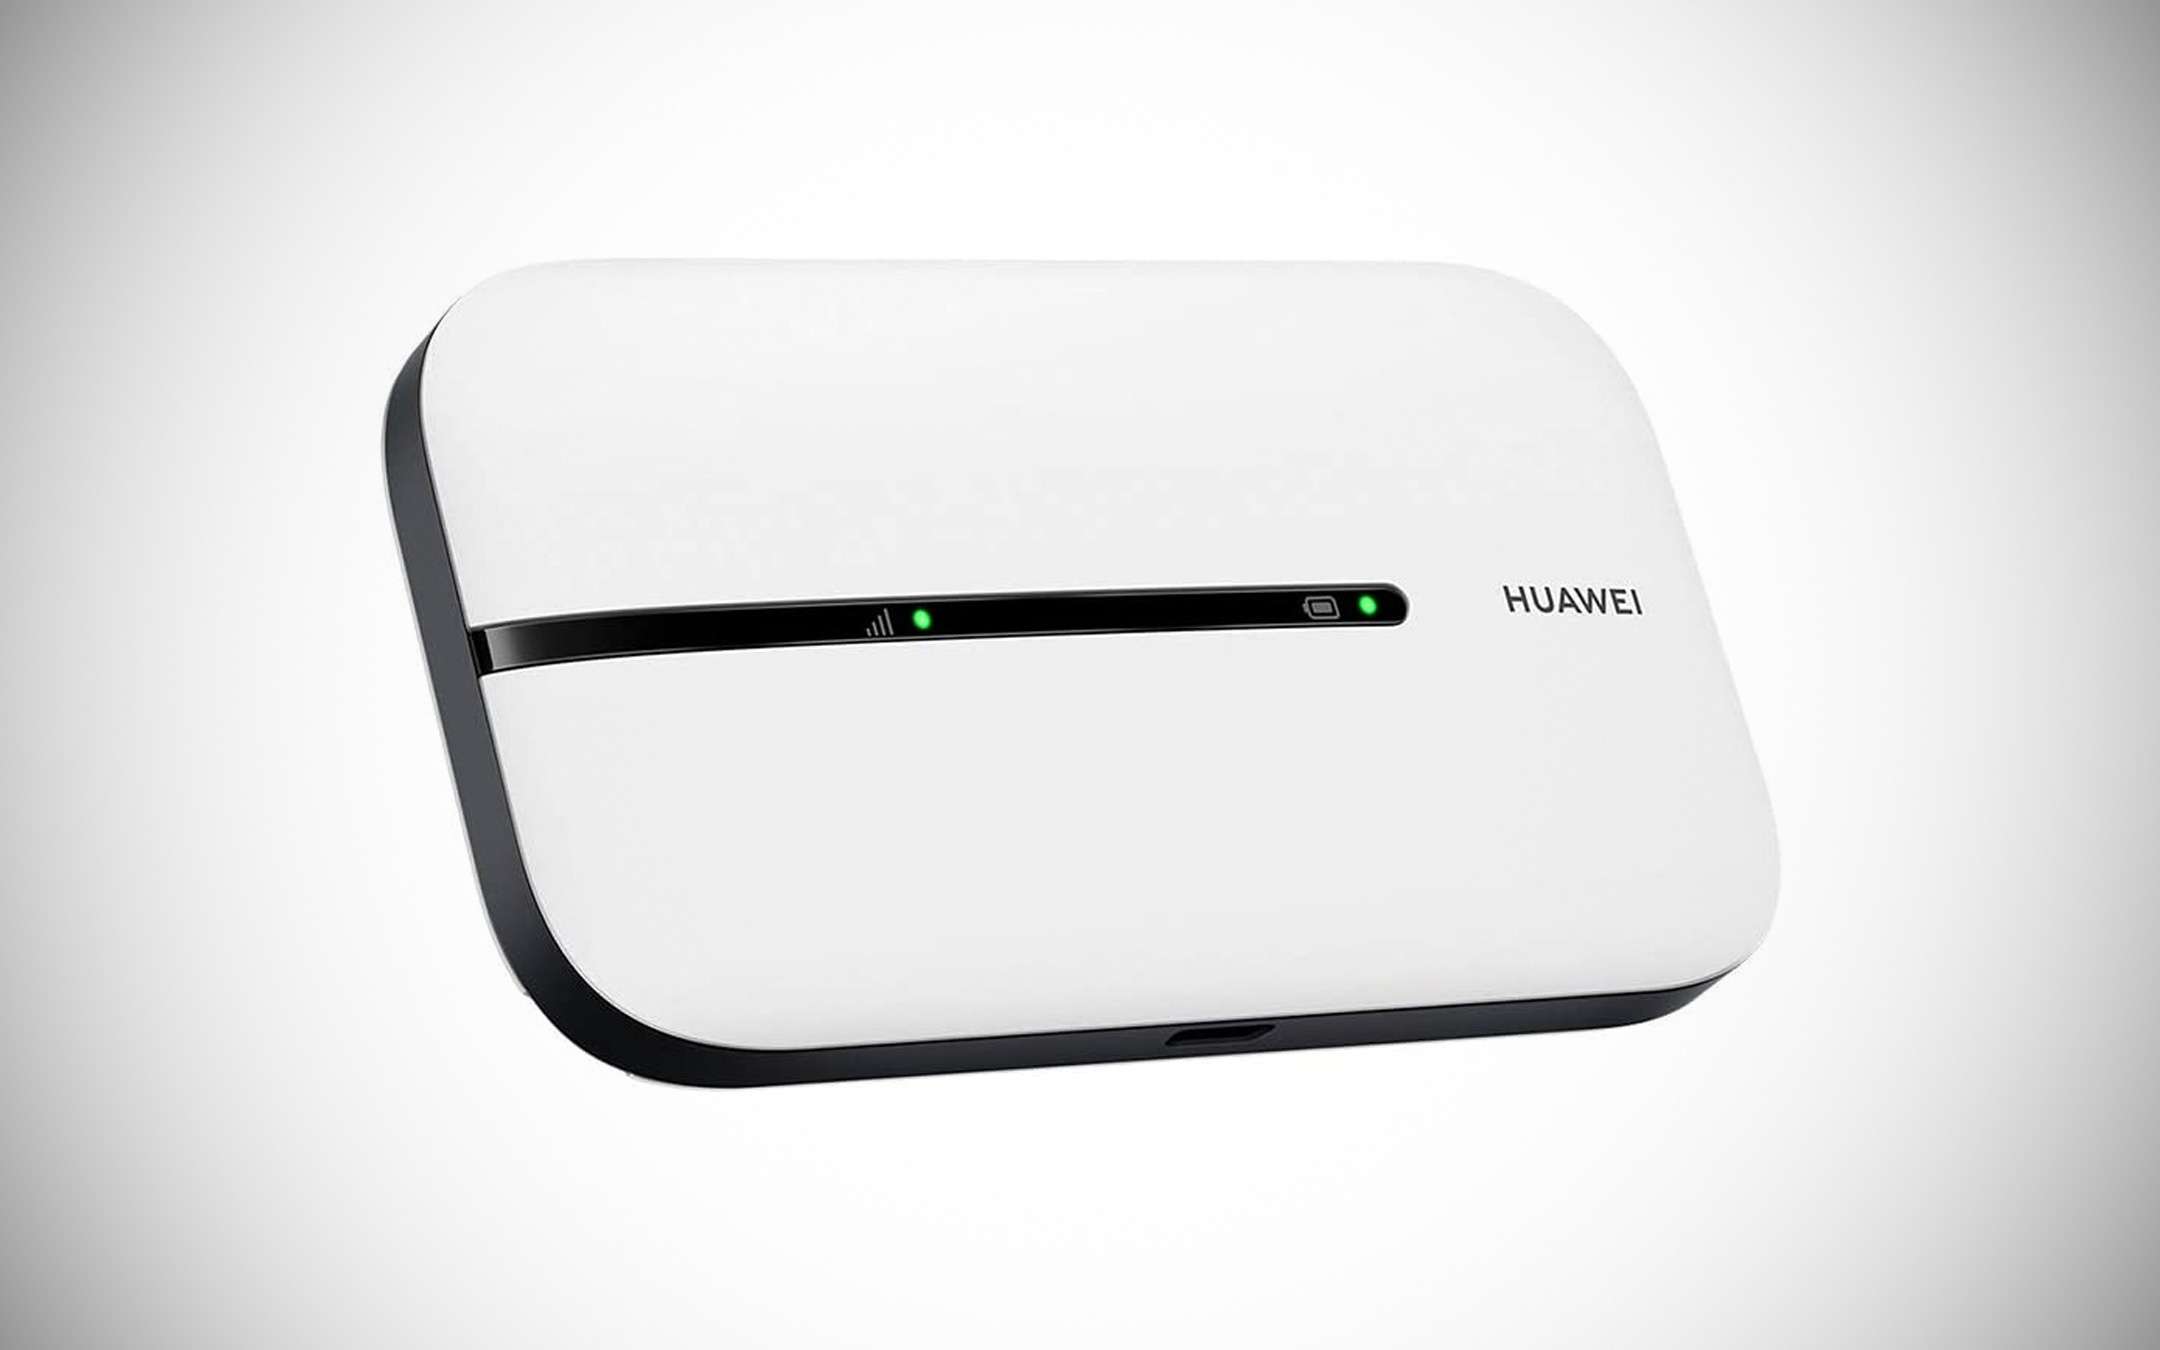 Take WiFi on vacation with Huawei Mobile WiFi 3S